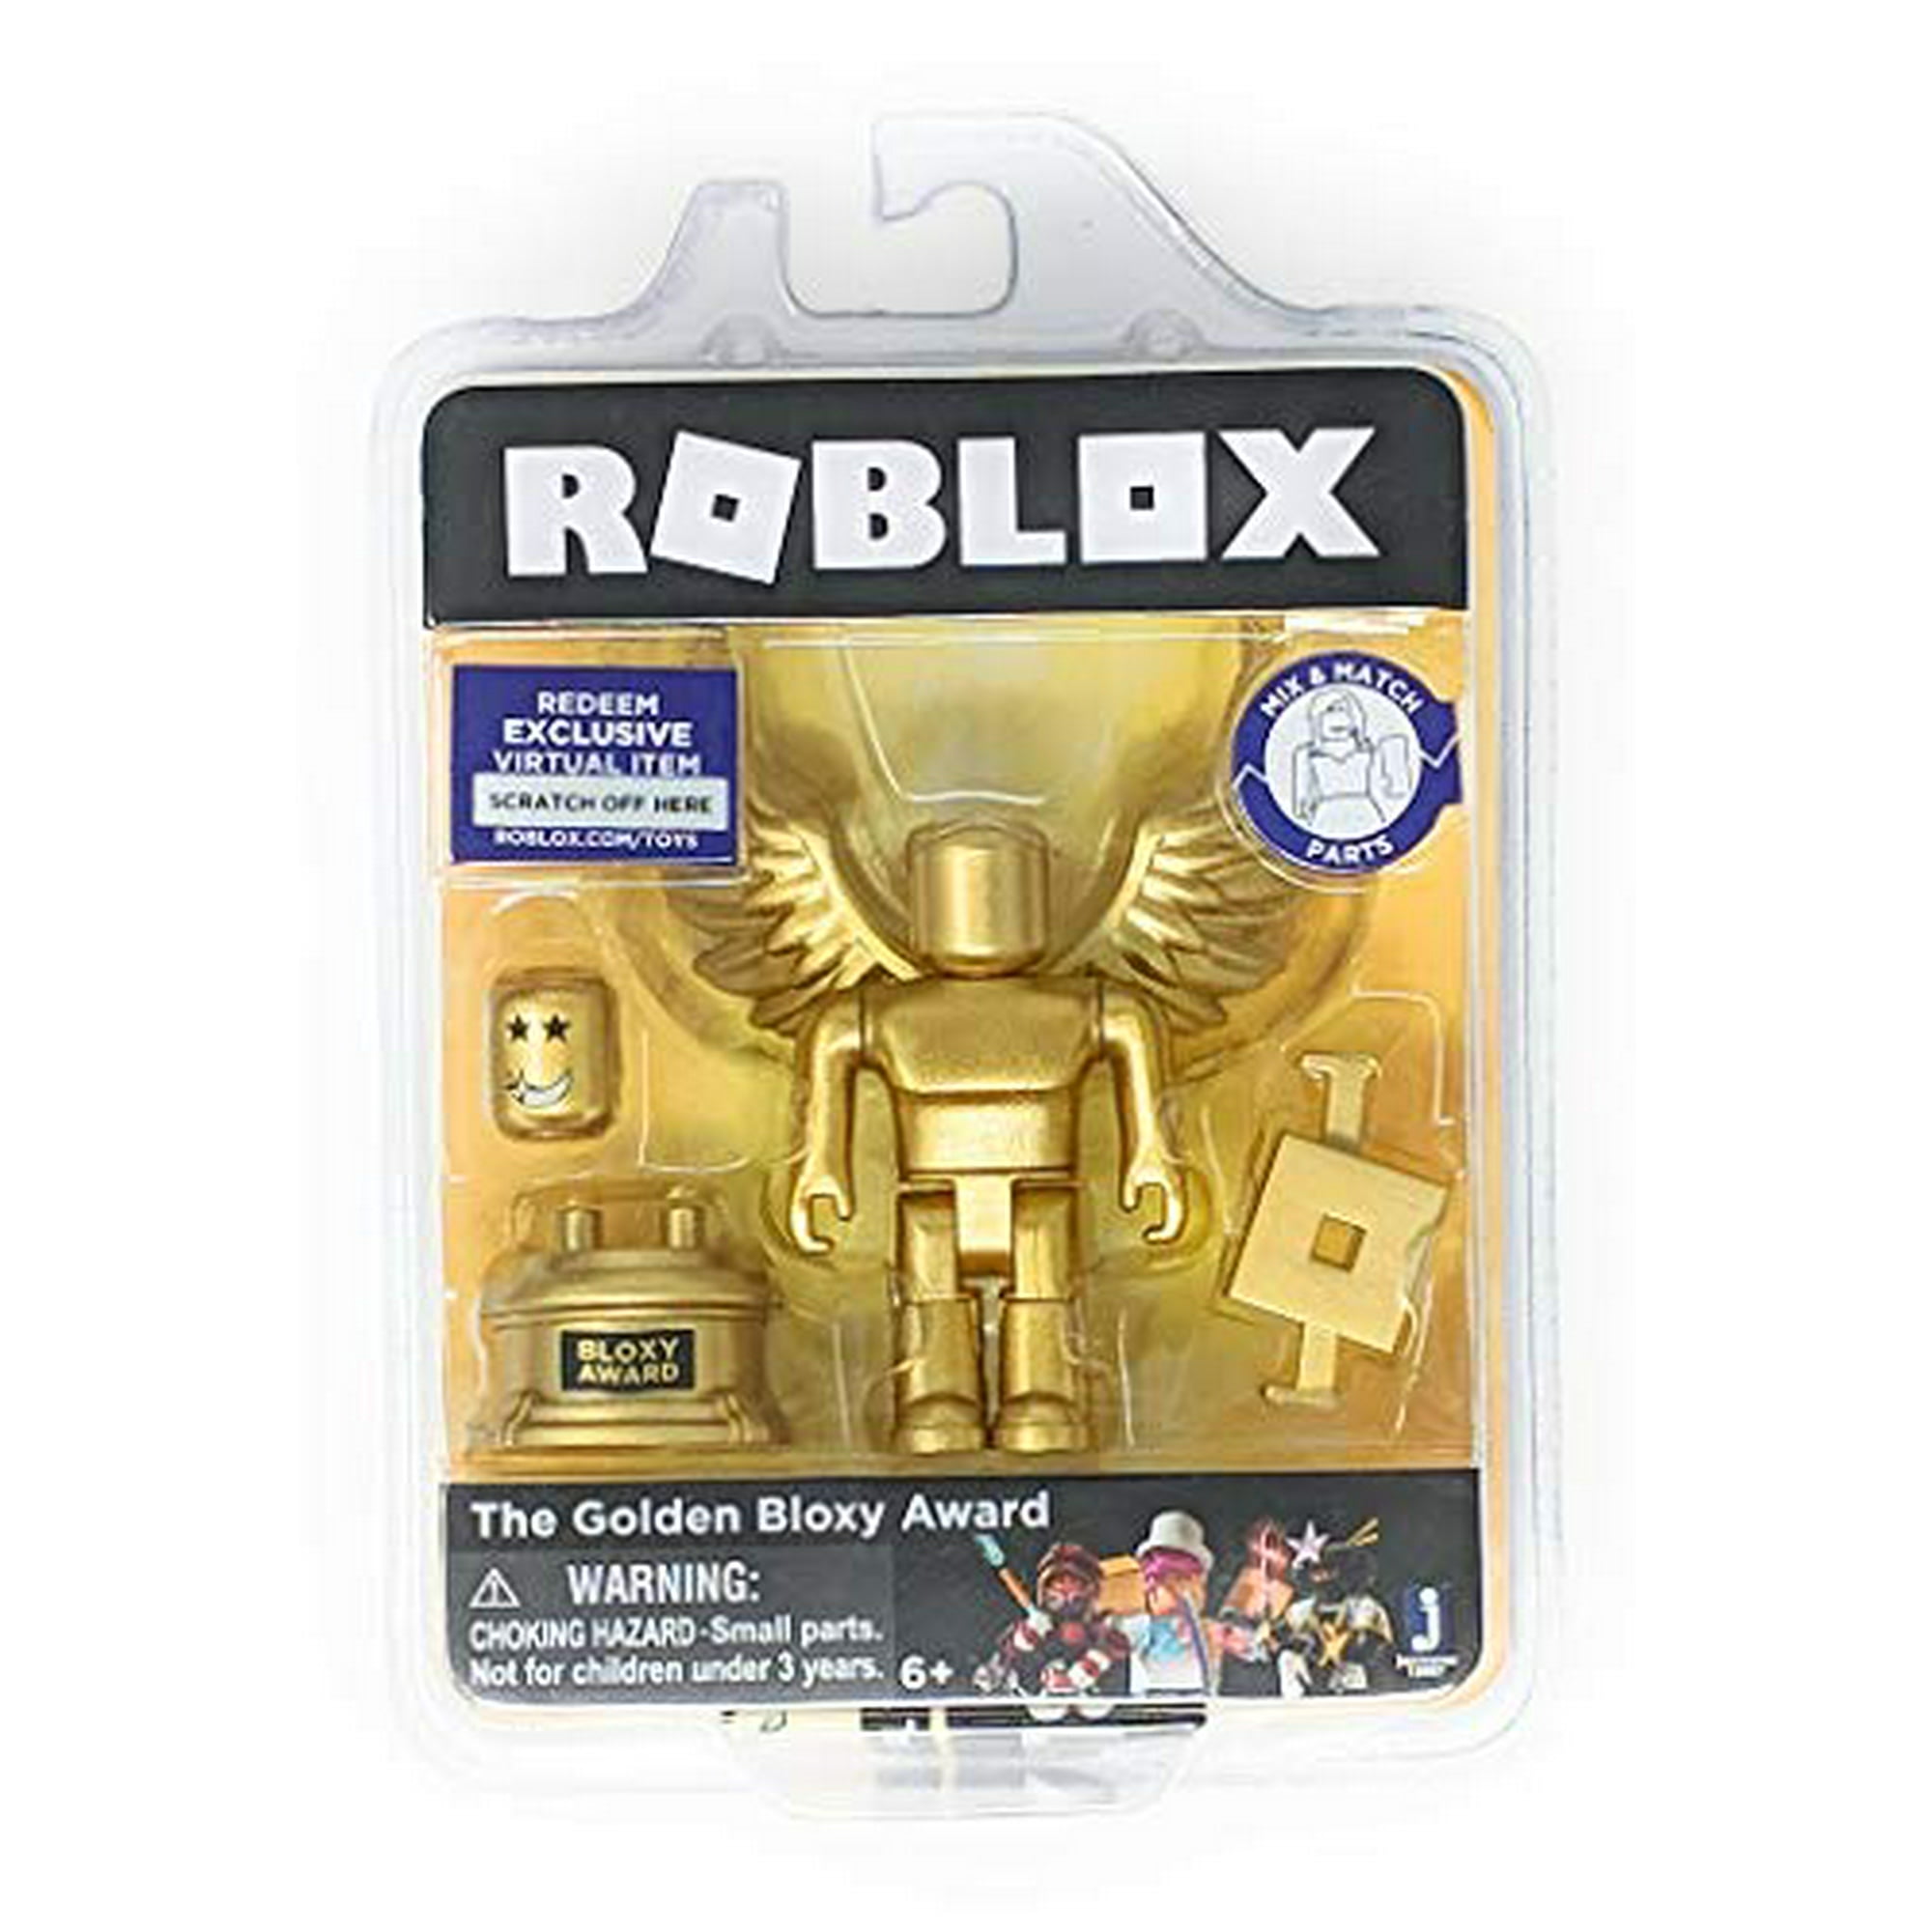 Roblox Gold Collection The Golden Bloxy Award Single Figure Pack With Exclusive Virtual Item Code Walmart Canada - roblox mad studio pack walmart canada